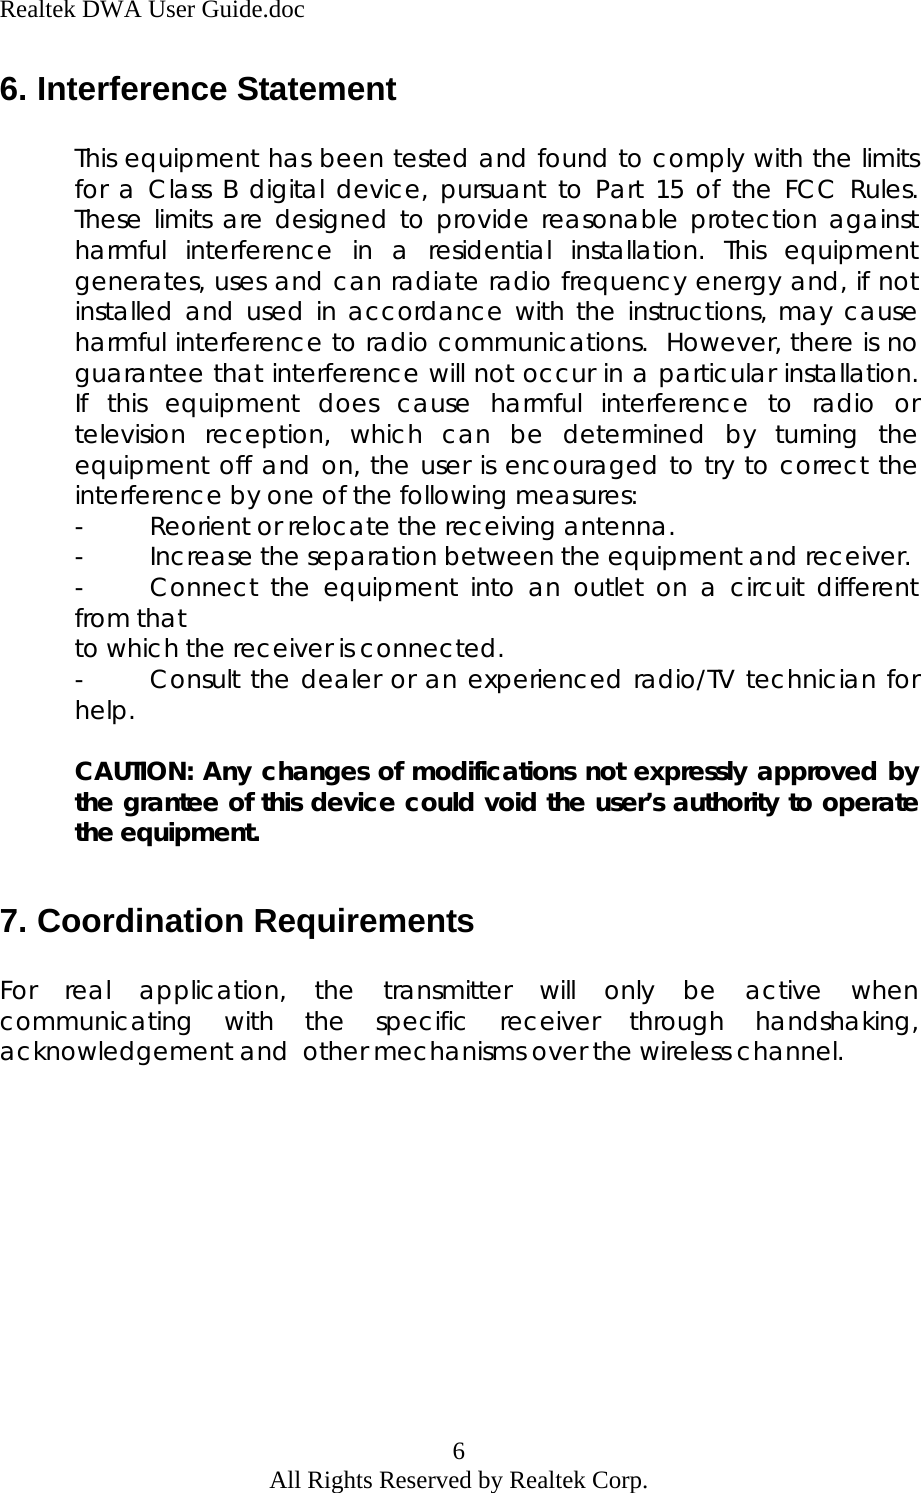 Realtek DWA User Guide.doc 6. Interference Statement  This equipment has been tested and found to comply with the limits for a Class B digital device, pursuant to Part 15 of the FCC Rules.  These limits are designed to provide reasonable protection against harmful interference in a residential installation. This equipment generates, uses and can radiate radio frequency energy and, if not installed and used in accordance with the instructions, may cause harmful interference to radio communications.  However, there is no guarantee that interference will not occur in a particular installation.  If this equipment does cause harmful interference to radio or television reception, which can be determined by turning the equipment off and on, the user is encouraged to try to correct the interference by one of the following measures: -  Reorient or relocate the receiving antenna. -  Increase the separation between the equipment and receiver. -  Connect the equipment into an outlet on a circuit different from that  to which the receiver is connected. -  Consult the dealer or an experienced radio/TV technician for help.  CAUTION: Any changes of modifications not expressly approved by the grantee of this device could void the user’s authority to operate the equipment.  7. Coordination Requirements  For real application, the transmitter will only be active when communicating with the specific receiver through handshaking, acknowledgement and  other mechanisms over the wireless channel.  6 All Rights Reserved by Realtek Corp. 